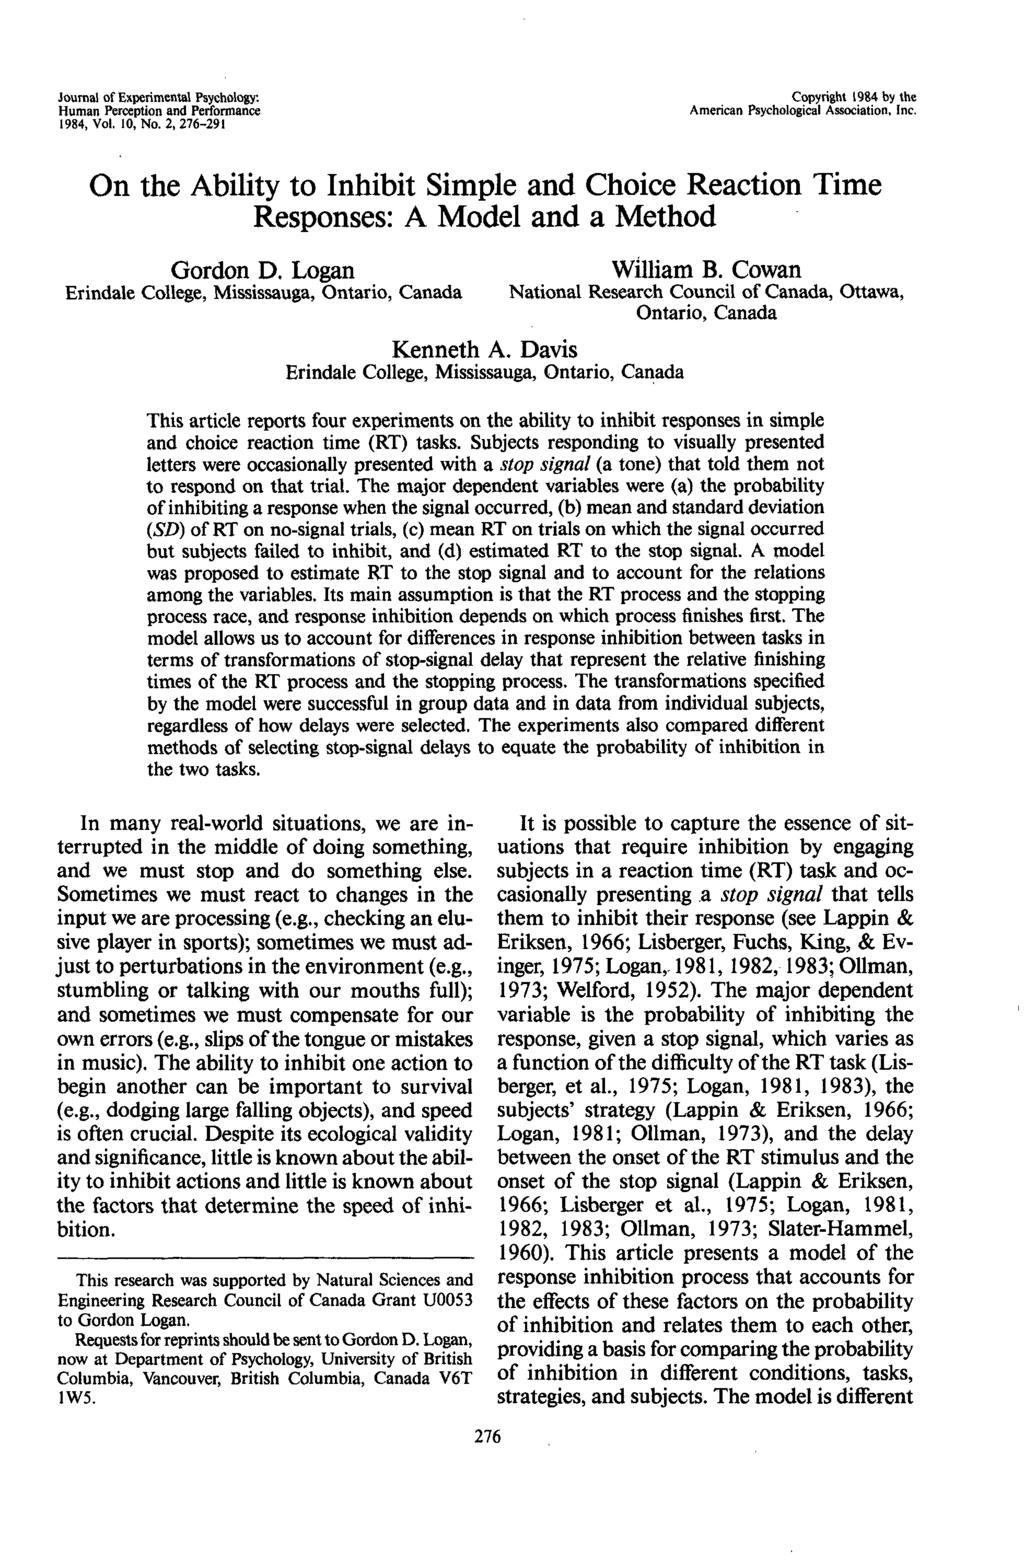 Journal of Experimental Psychology: Human Perception and Performance 1984, Vol. 10, No. 2, 276-291 Copyright 1984 by the American Psychological Association, Inc.